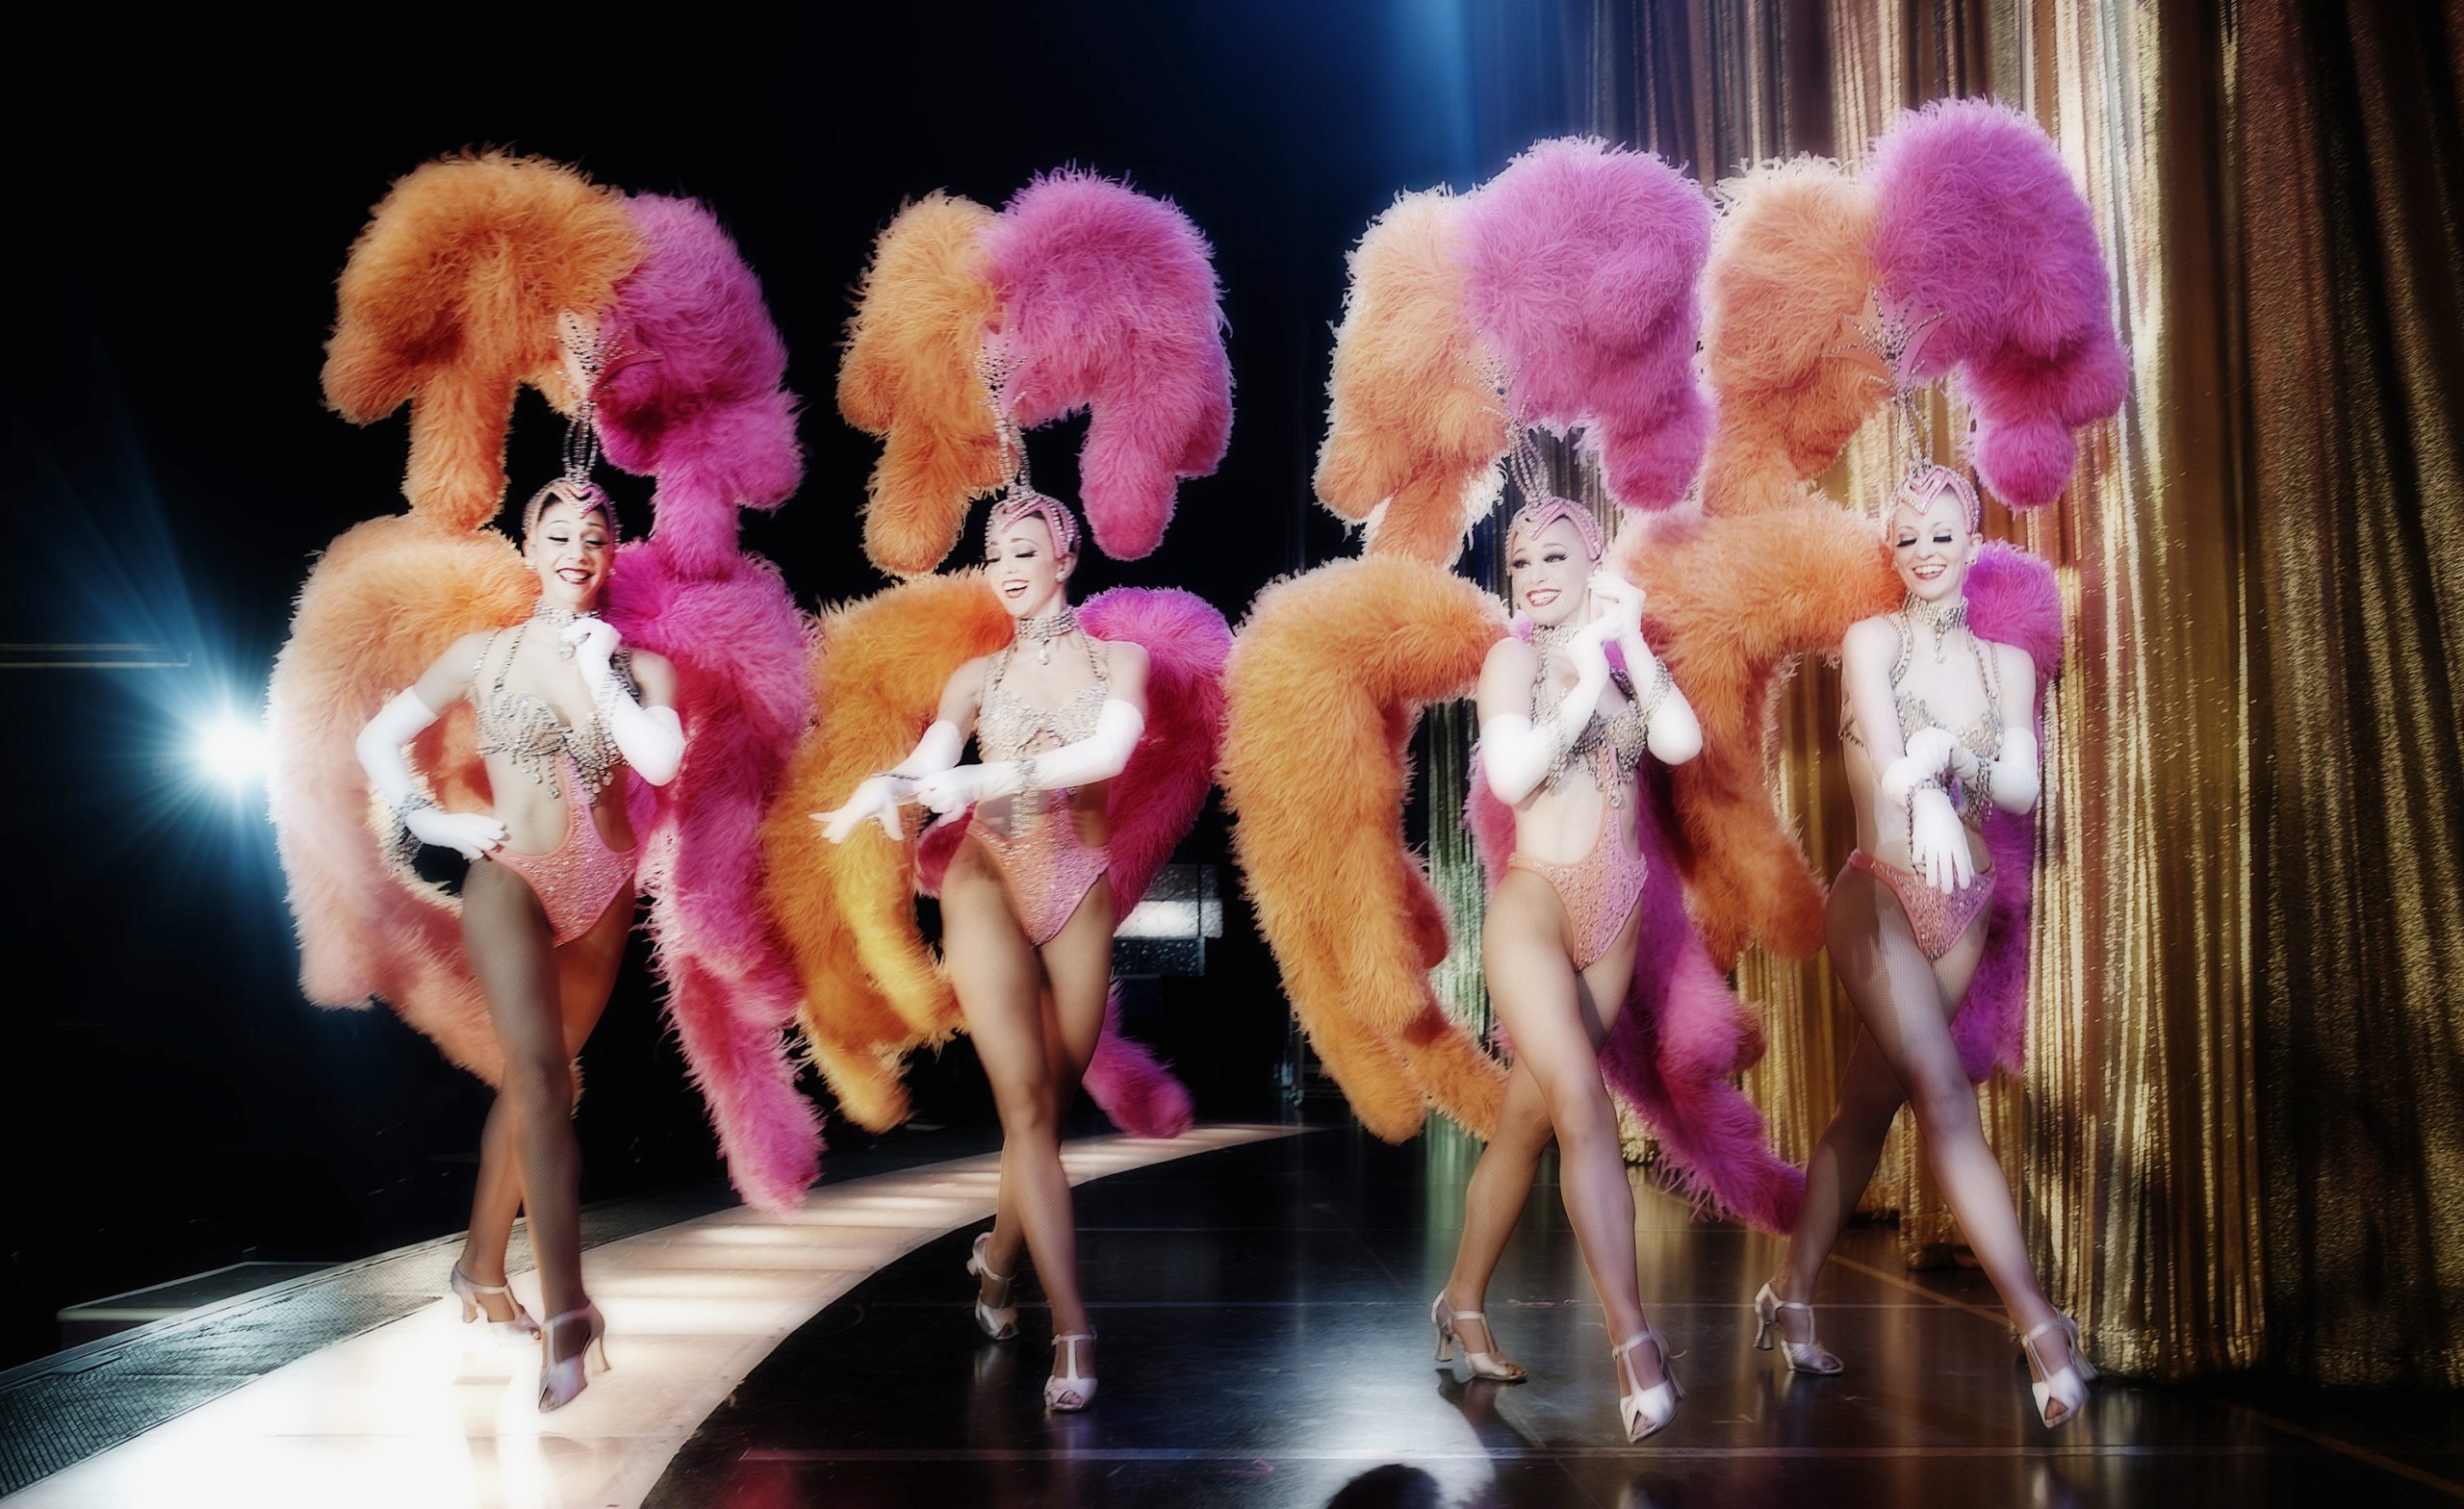 Four of the last real showgirls in Las Vegas